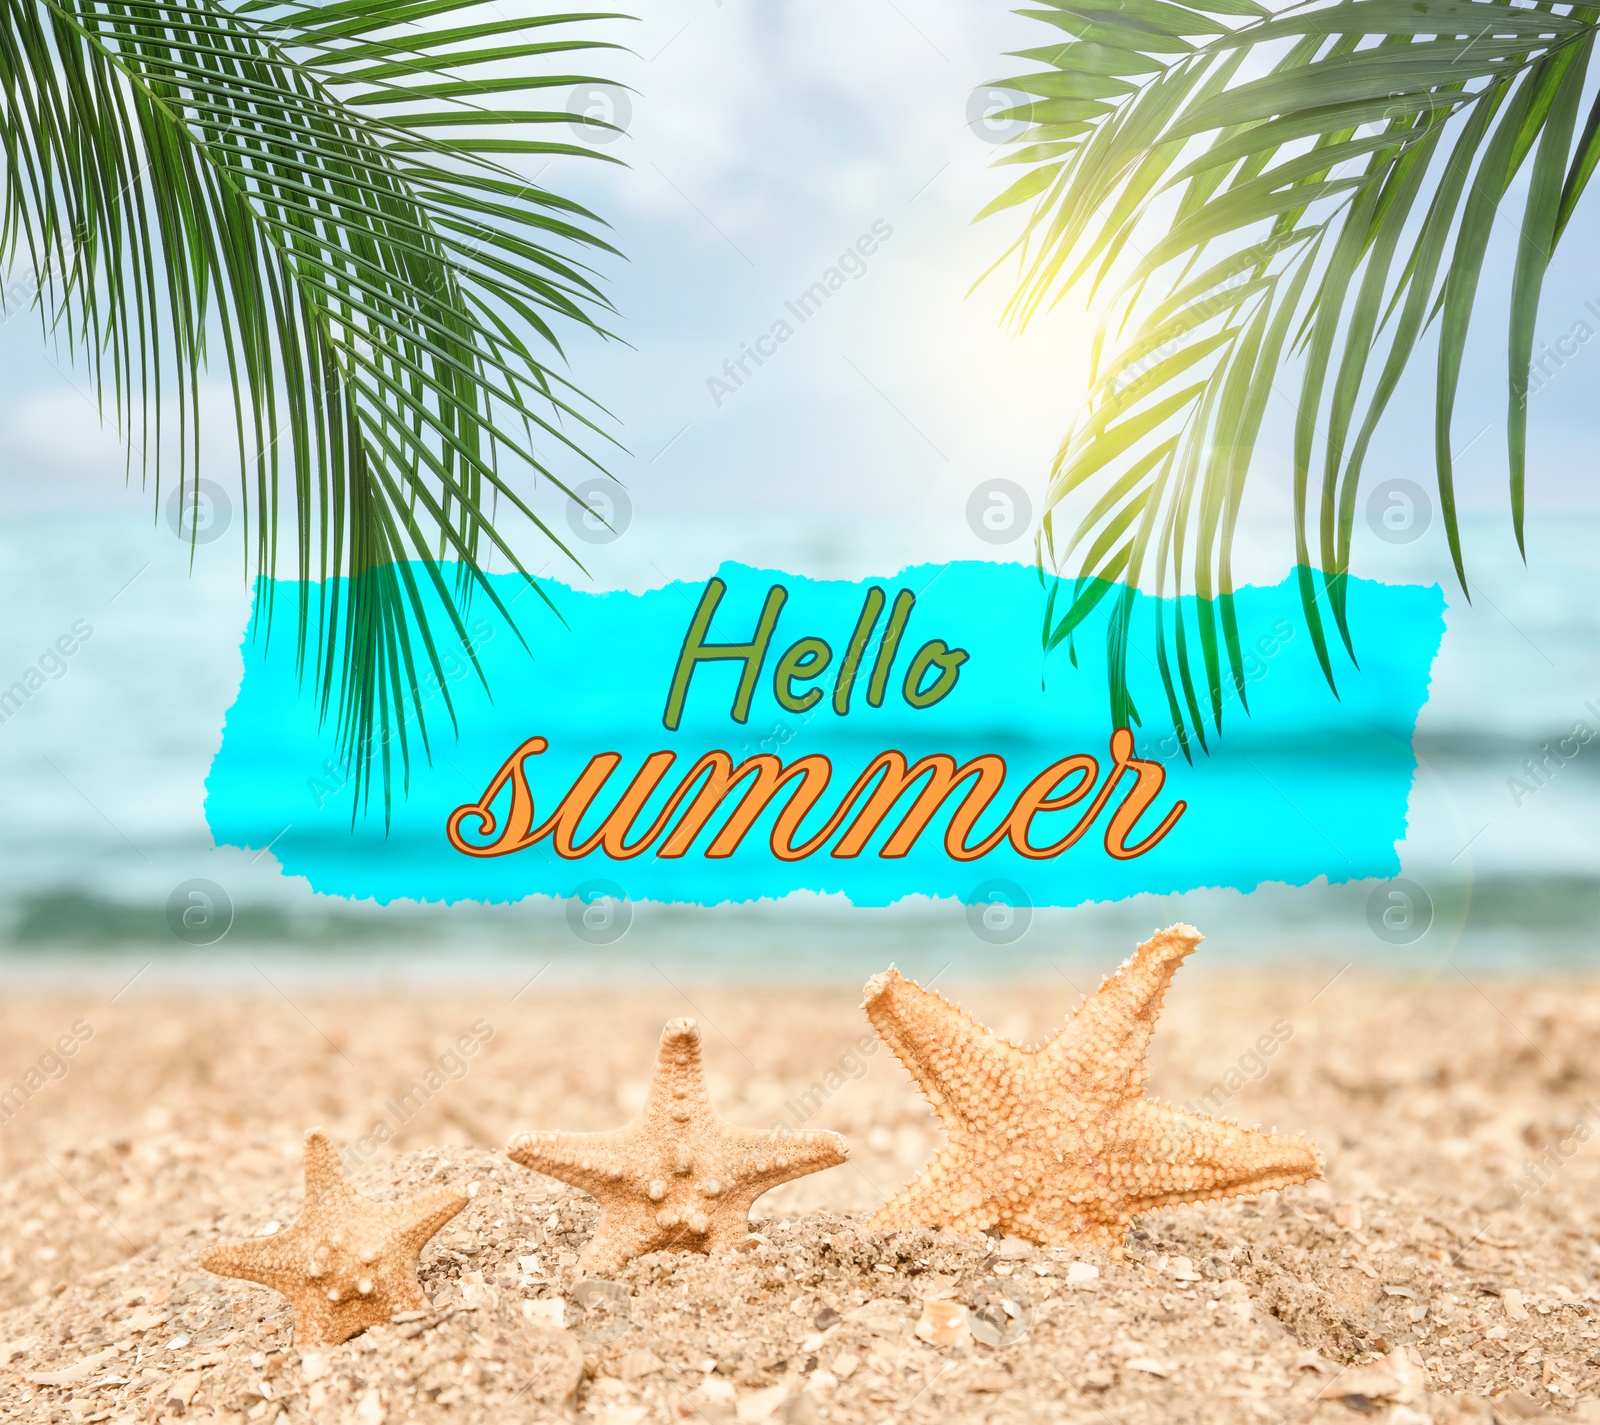 Image of Hello Summer text and sandy beach with sea stars